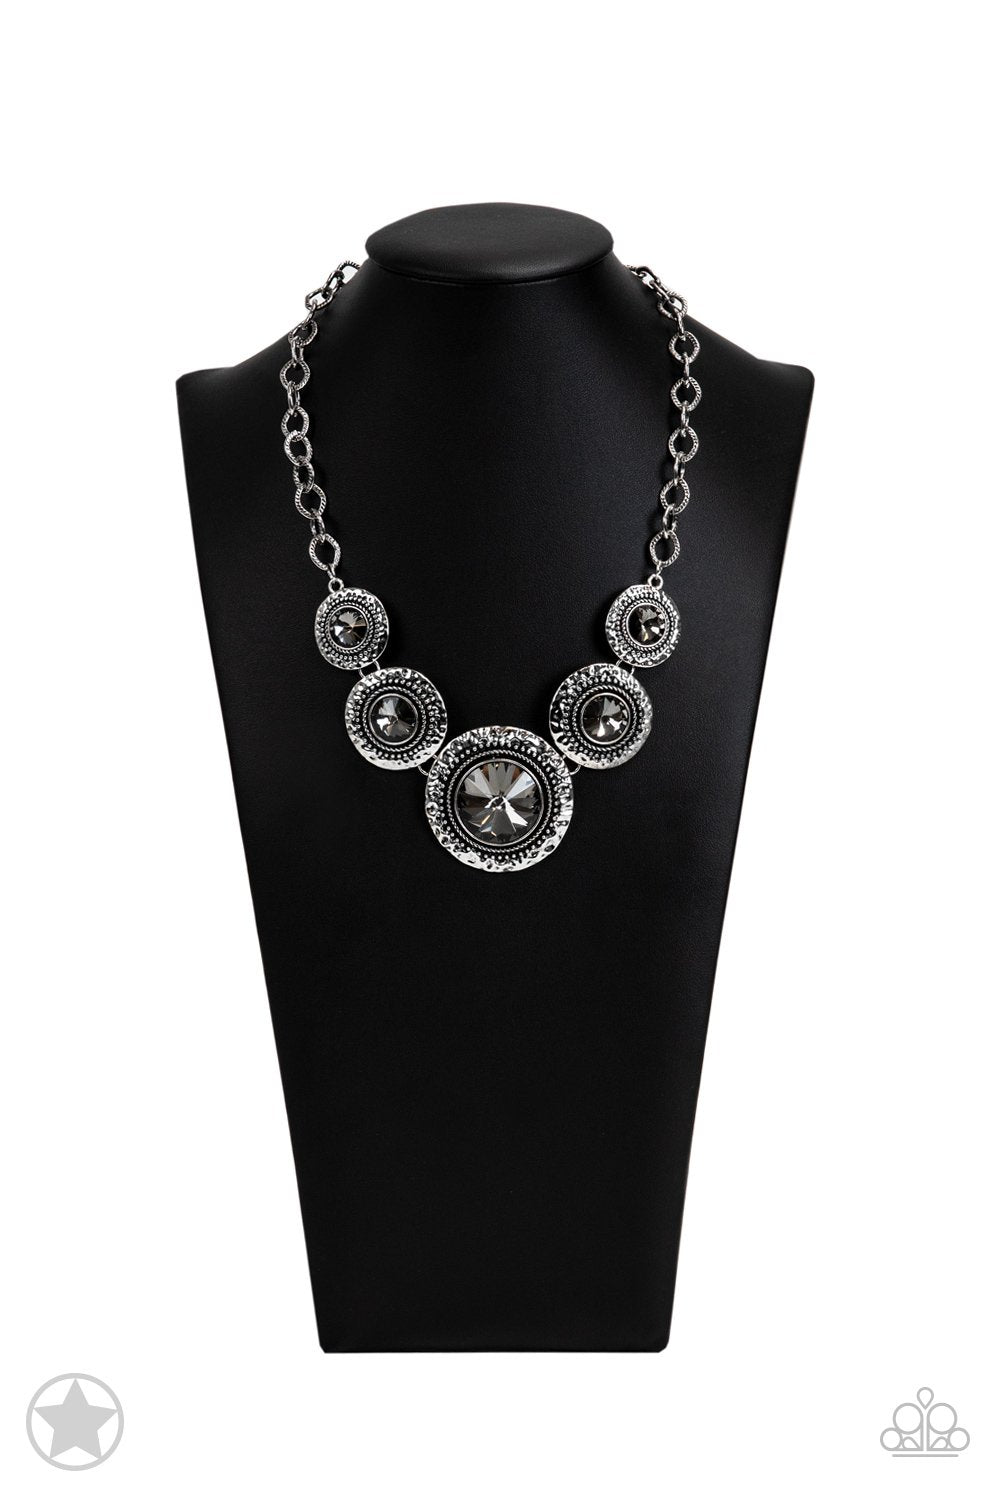 Global Glamour Silver and Smoky Gem Necklace and matching Earrings - Paparazzi Accessories- on bust -CarasShop.com - $5 Jewelry by Cara Jewels